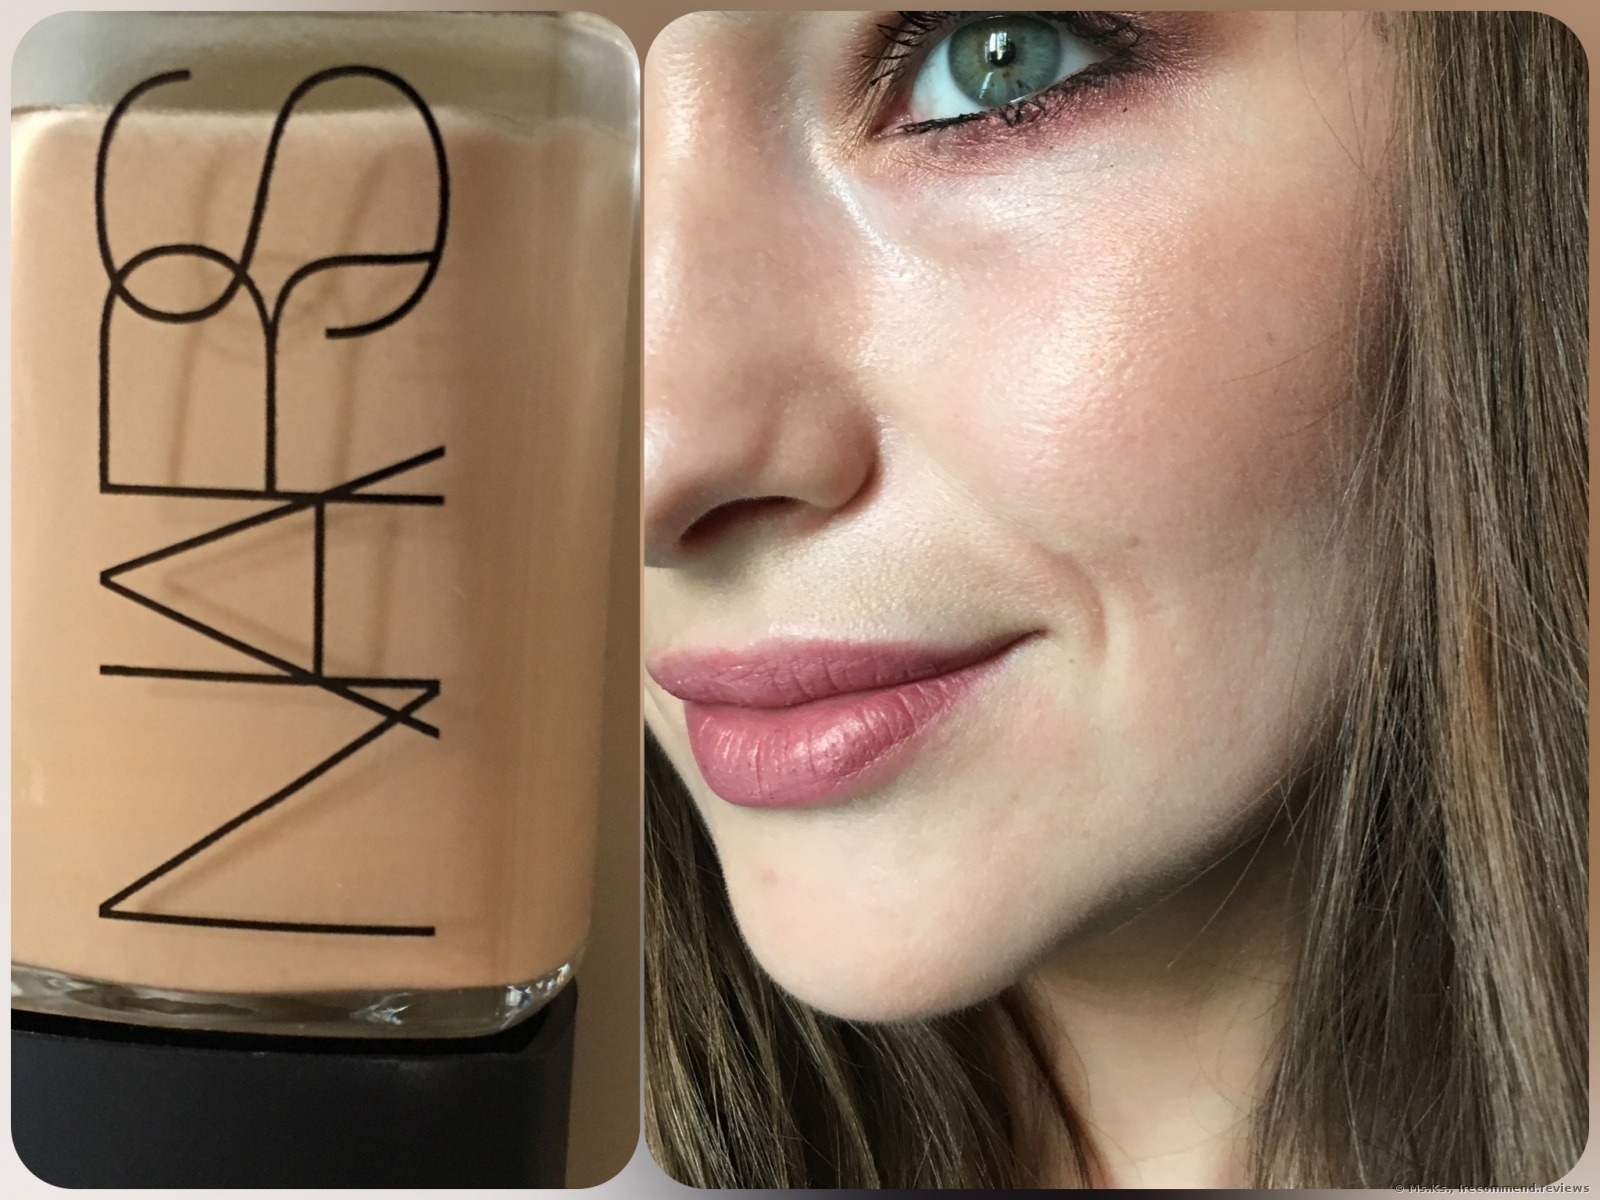 NARS Sheer Glow Foundation - «Nars Sheer Glow Foundation in the shade 4 Deauville is a pretty good foundation for my dry skin. + Swatches and makeup | reviews